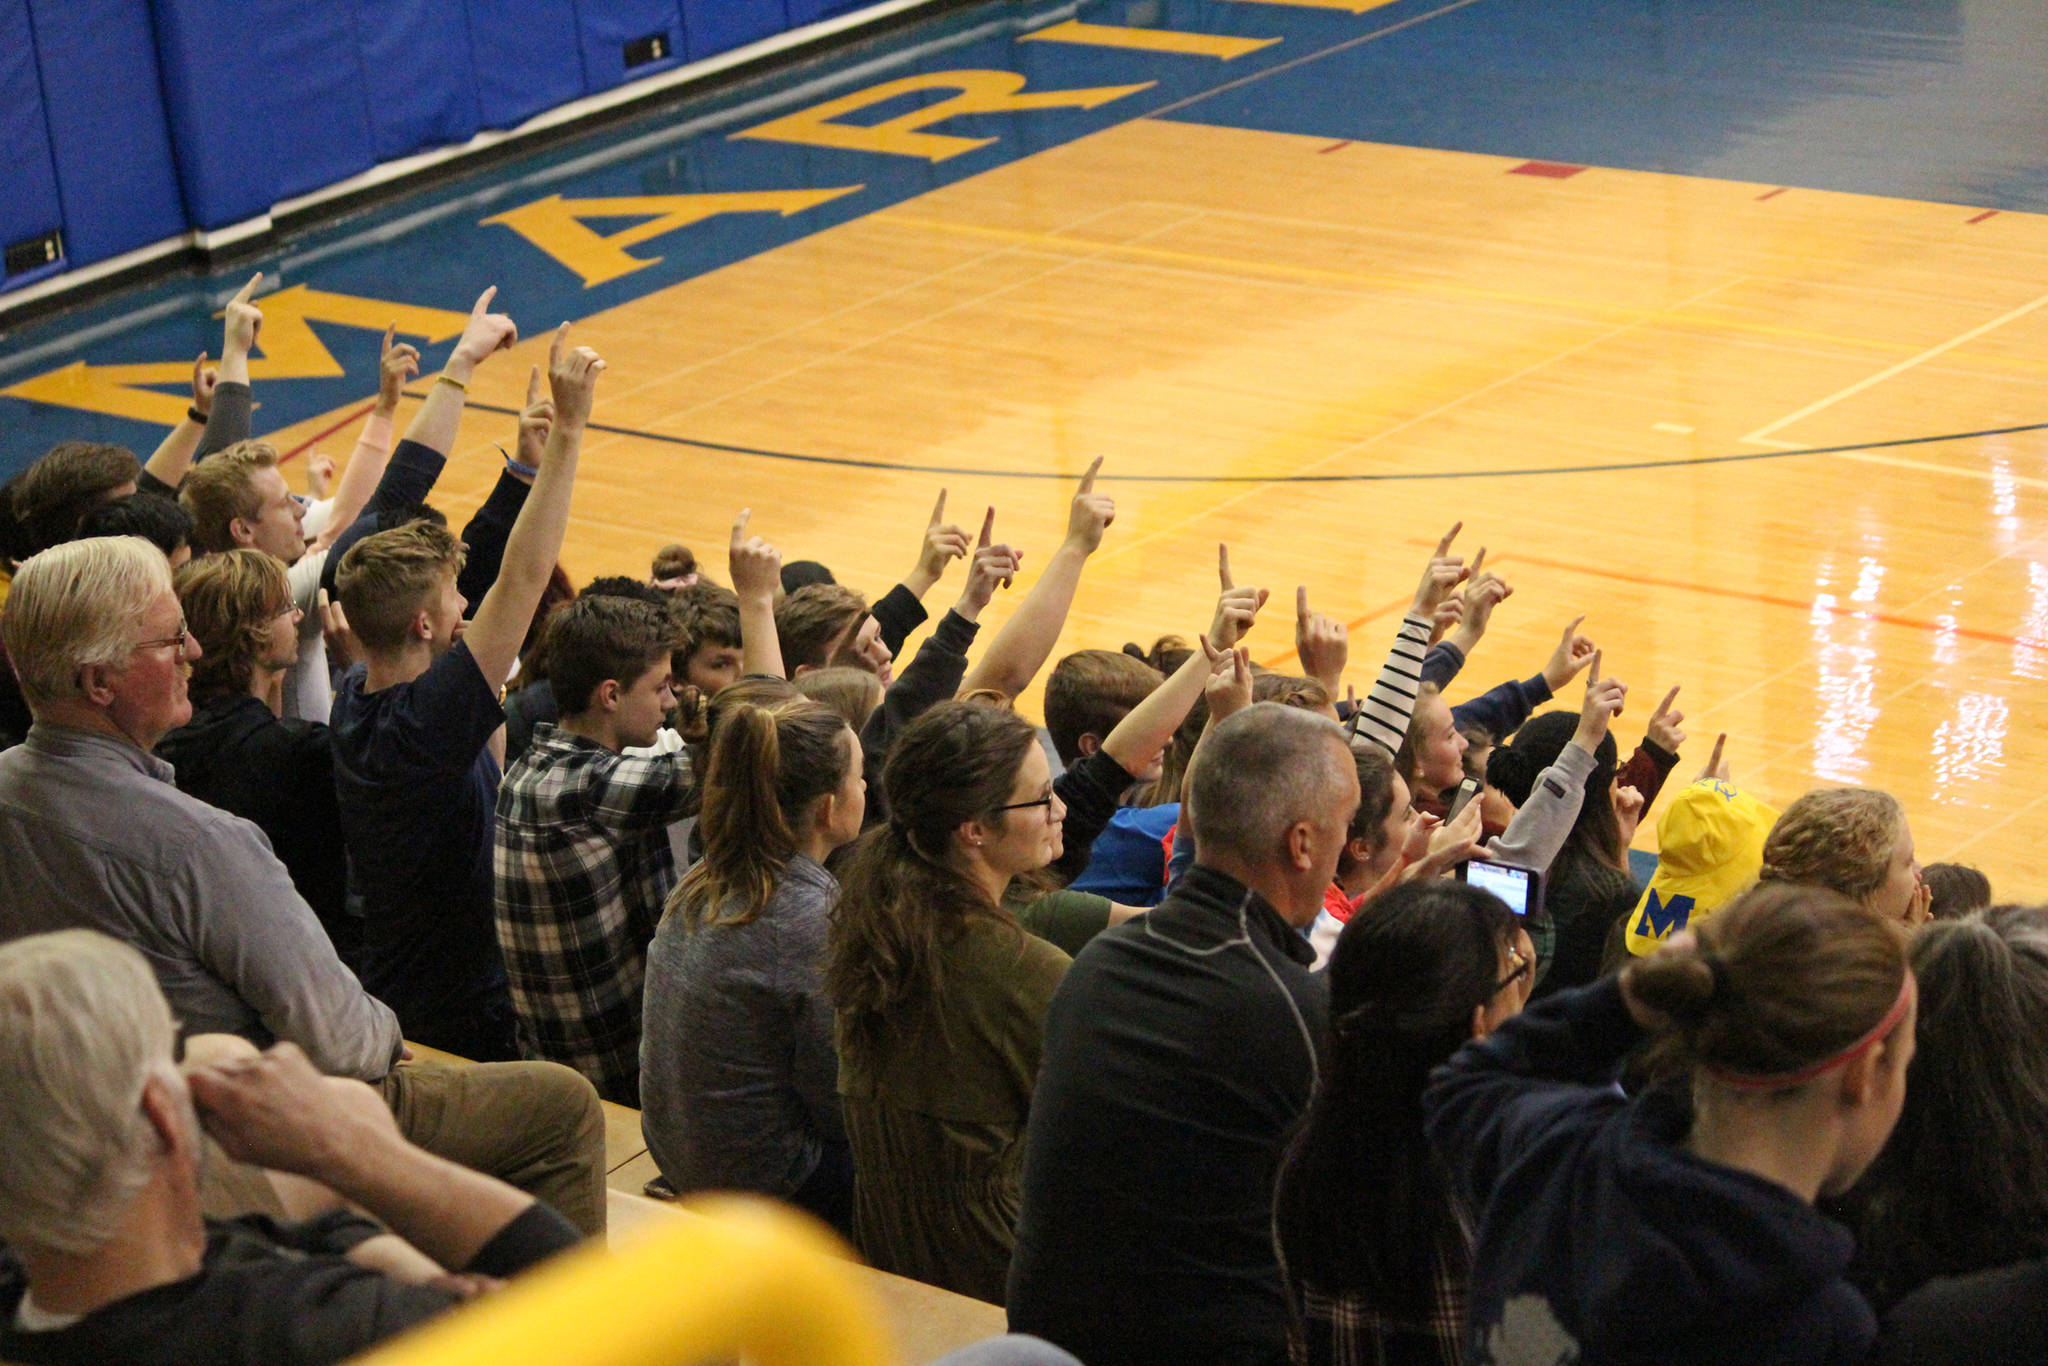 Spectators at the volleyball game between Homer High School and Nikiski on Saturday, Oct. 13, 2018 in Homer, Alaska, hold up one finger to signal that their team had one more point to go in order to win the set. Homer beat Nikiski three games to one. (Photo by Megan Pacer/Homer News)